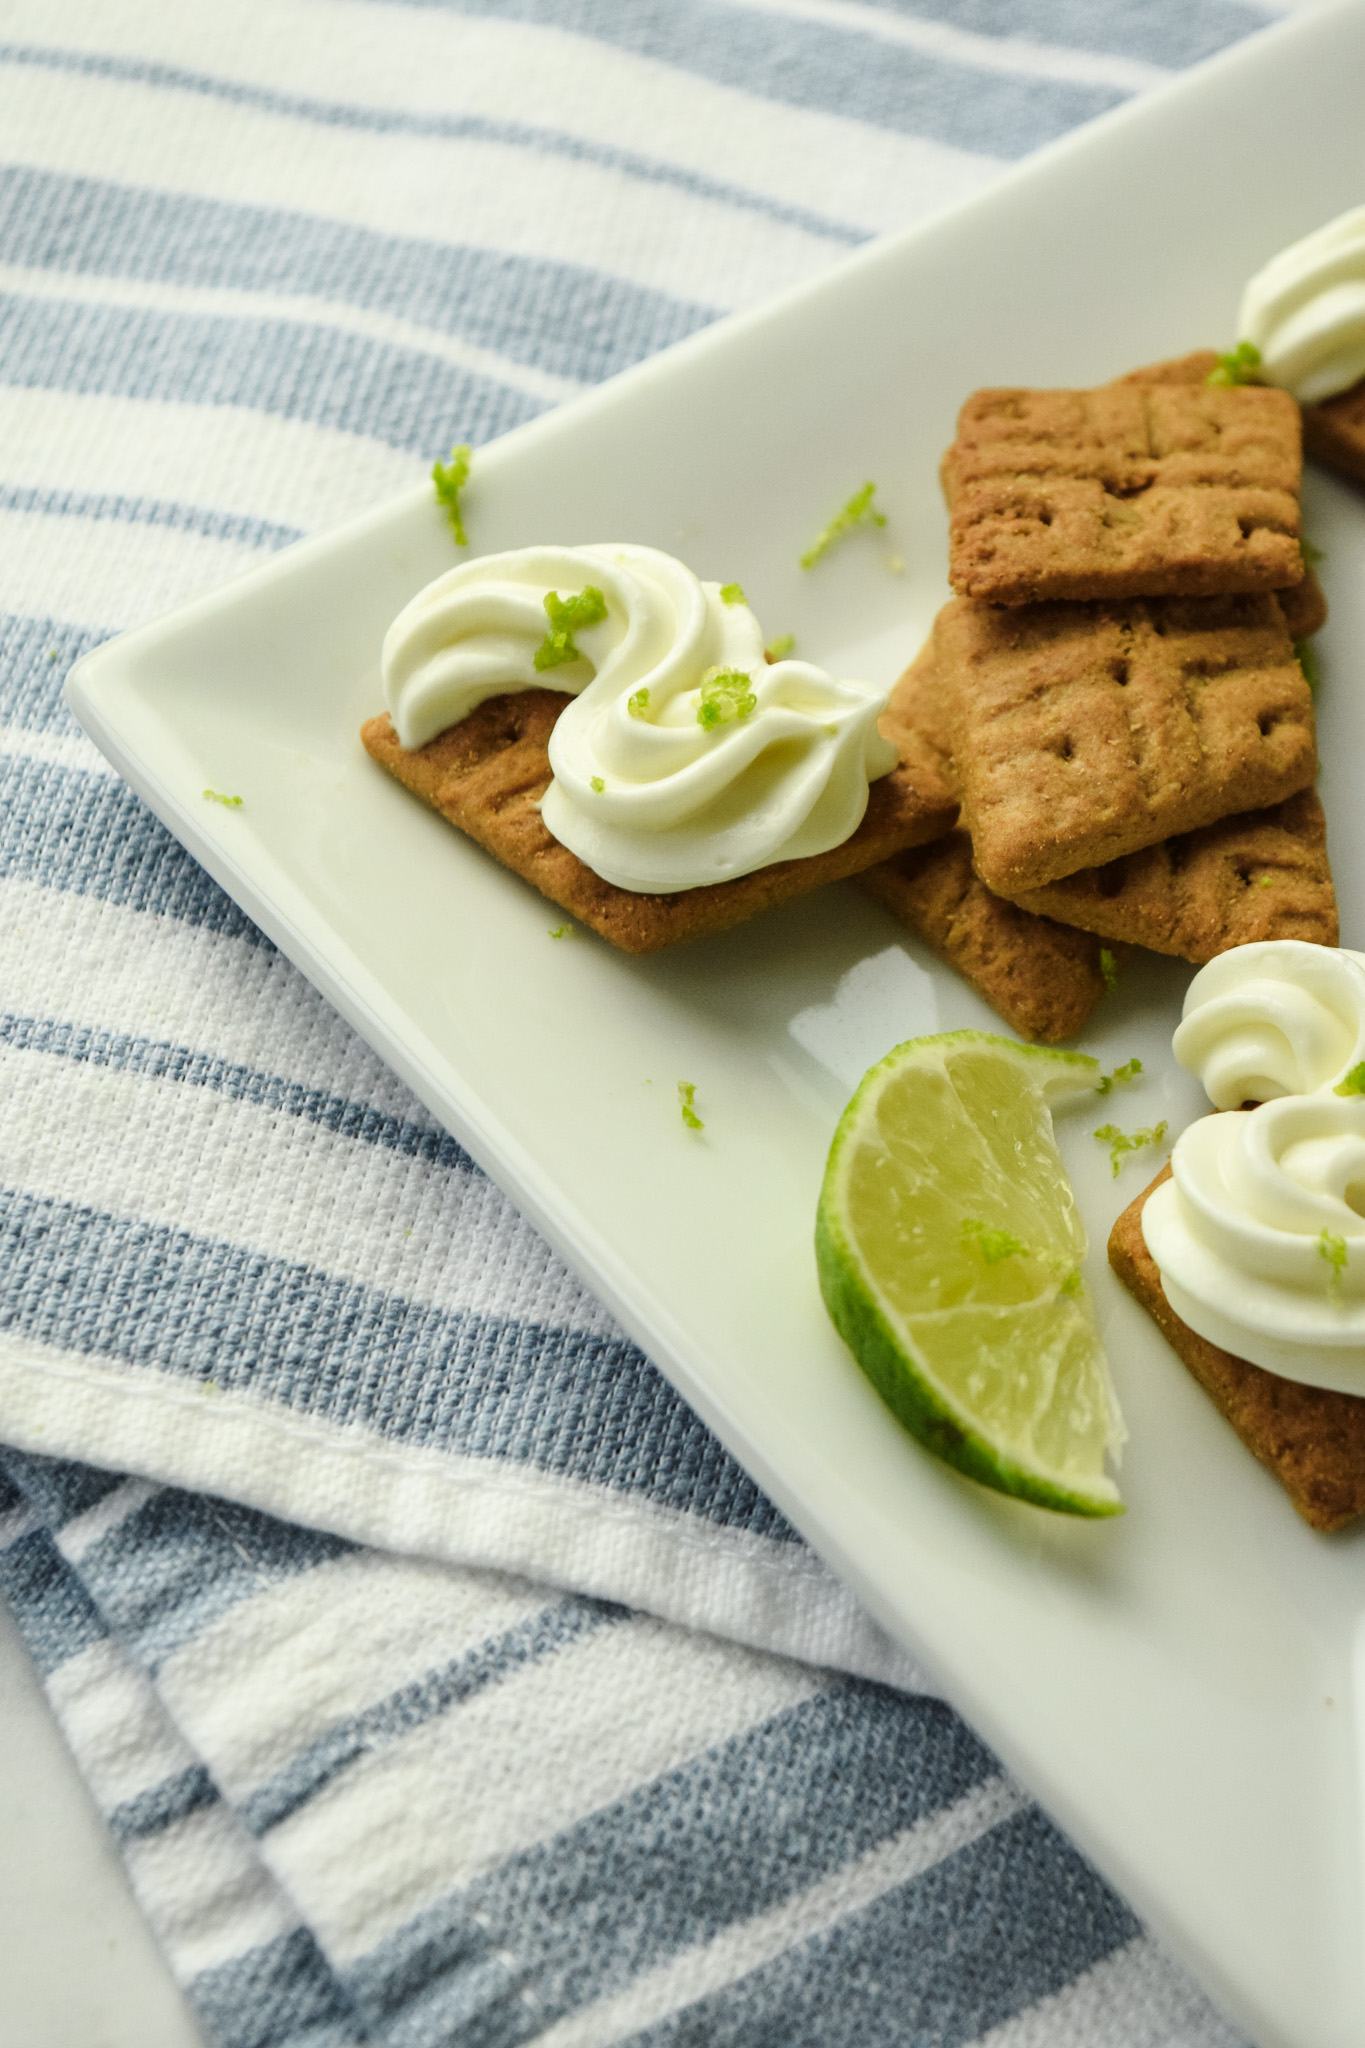 Key Lime Cheesecake Filling Piped onto Gluten Free Graham Crackers